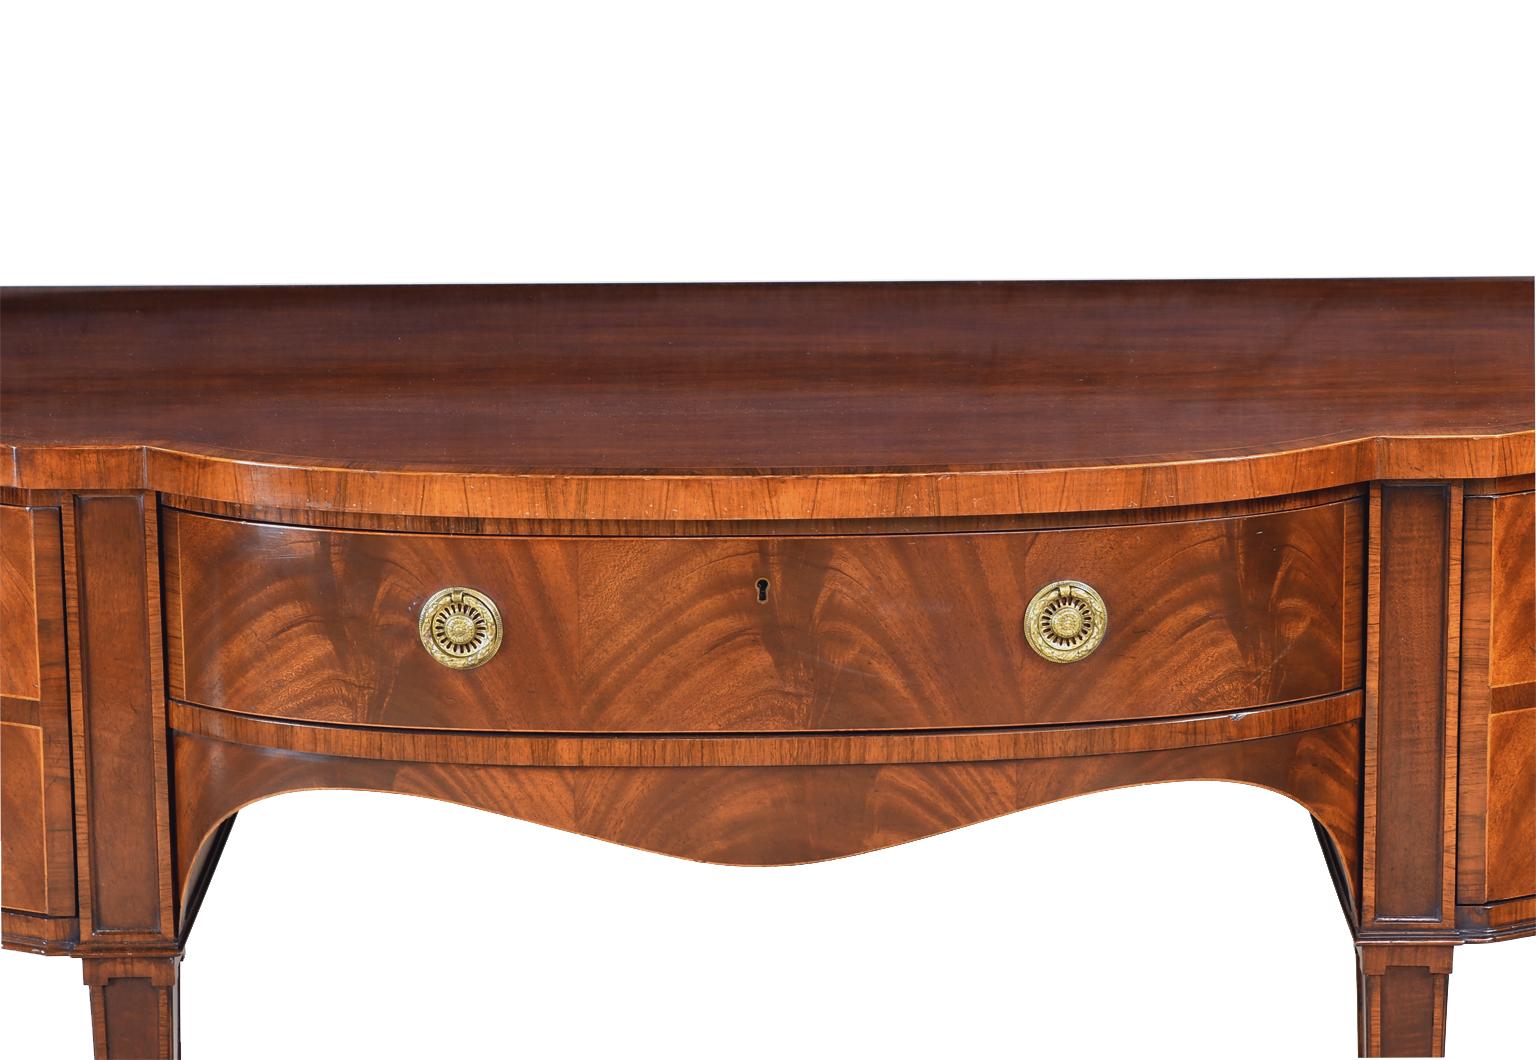 A handsome and well-crafted Sheraton-style sideboard in mahogany manufactured by Baker Furniture Company from their Stately Homes of England and Scotland Collection. Features a serpentine front and sides, with a center drawer for silverware flanked